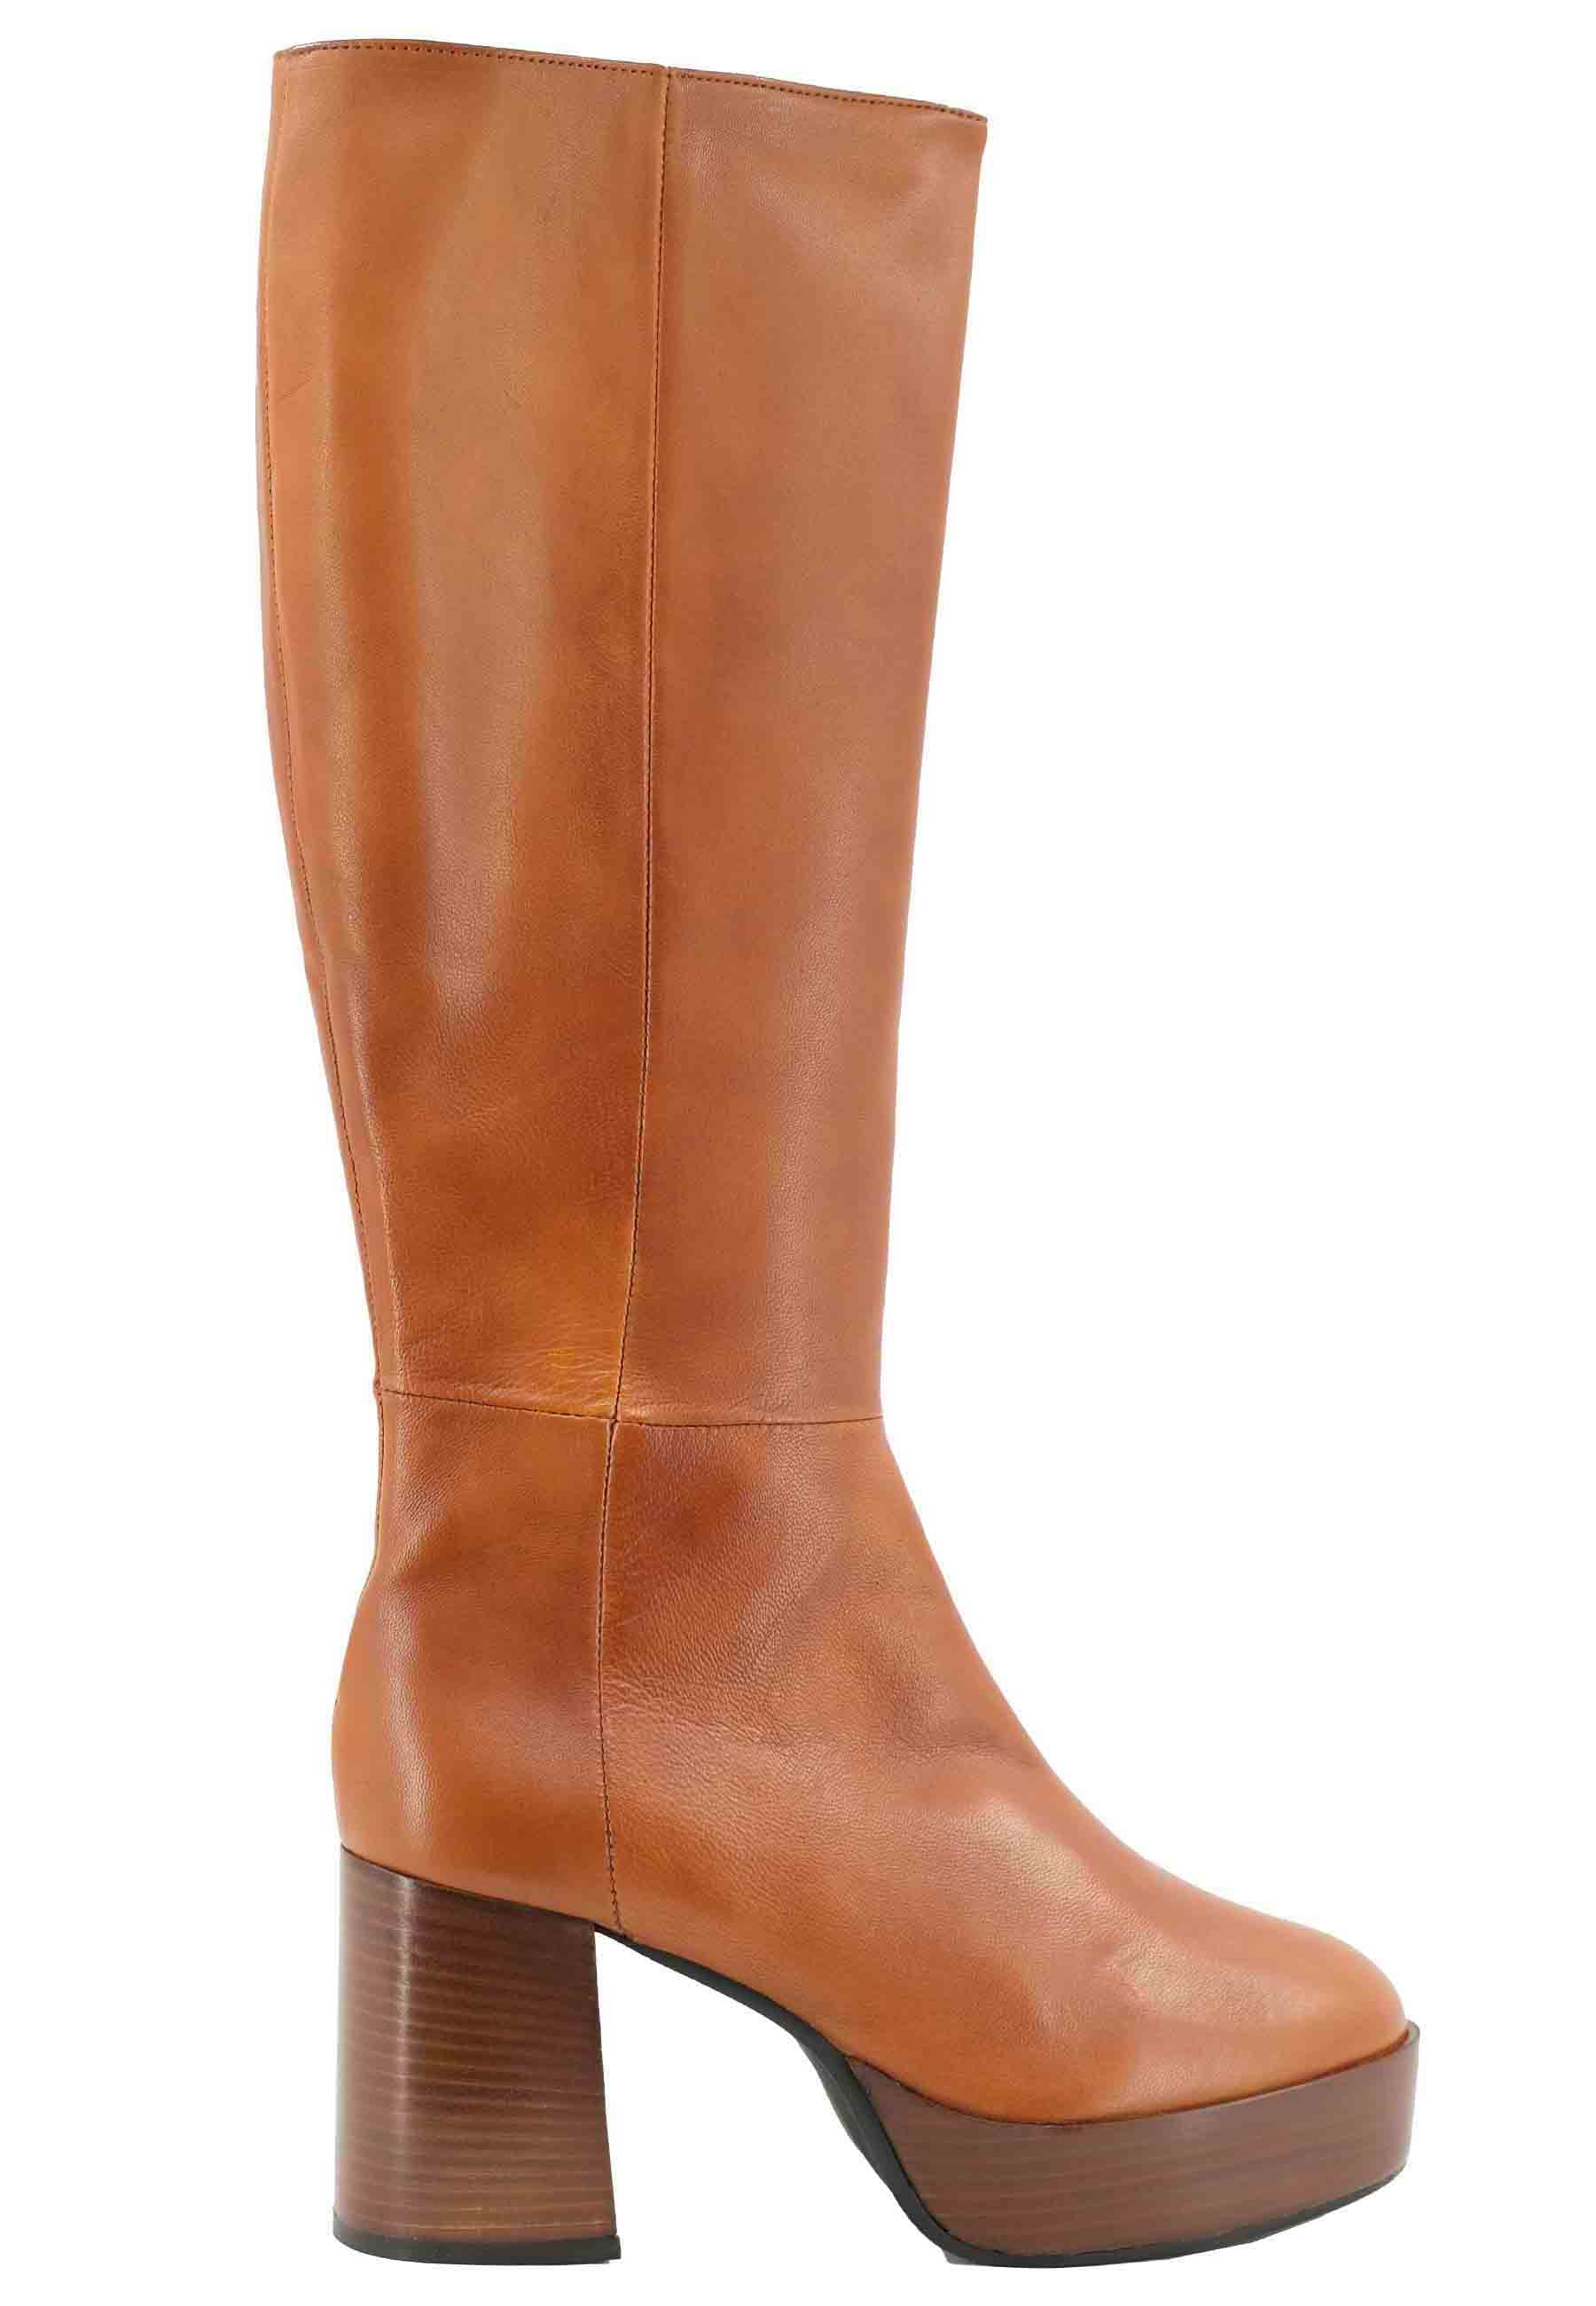 ST1557 boots in tan leather with heel and platform